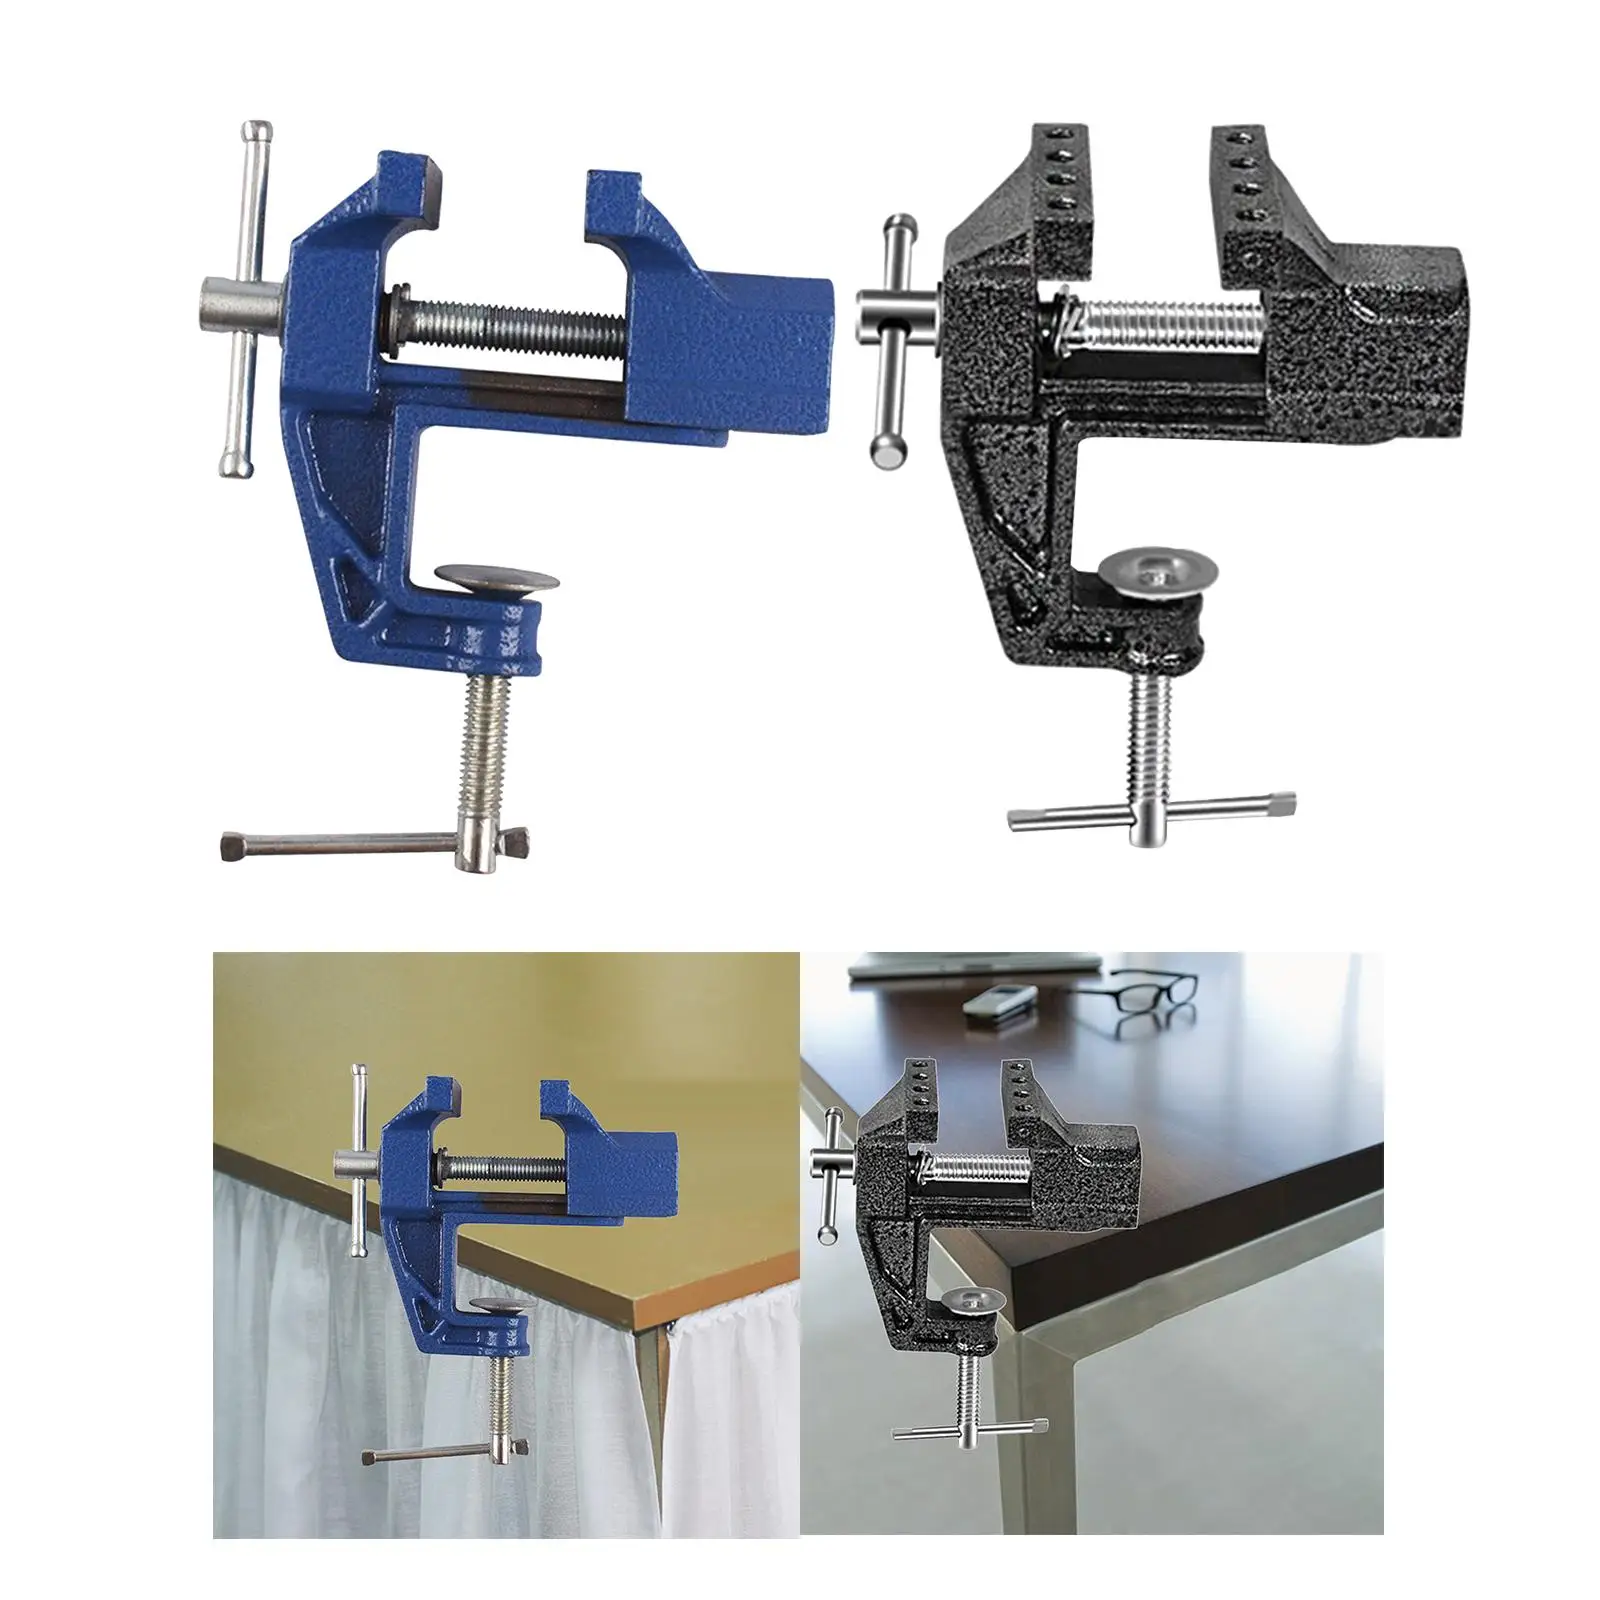 Aluminum Alloy Portable Bench Vise Drill Clamp Table Clamp Vice Universal Bench Vise for Woodworking Small Work Hobby